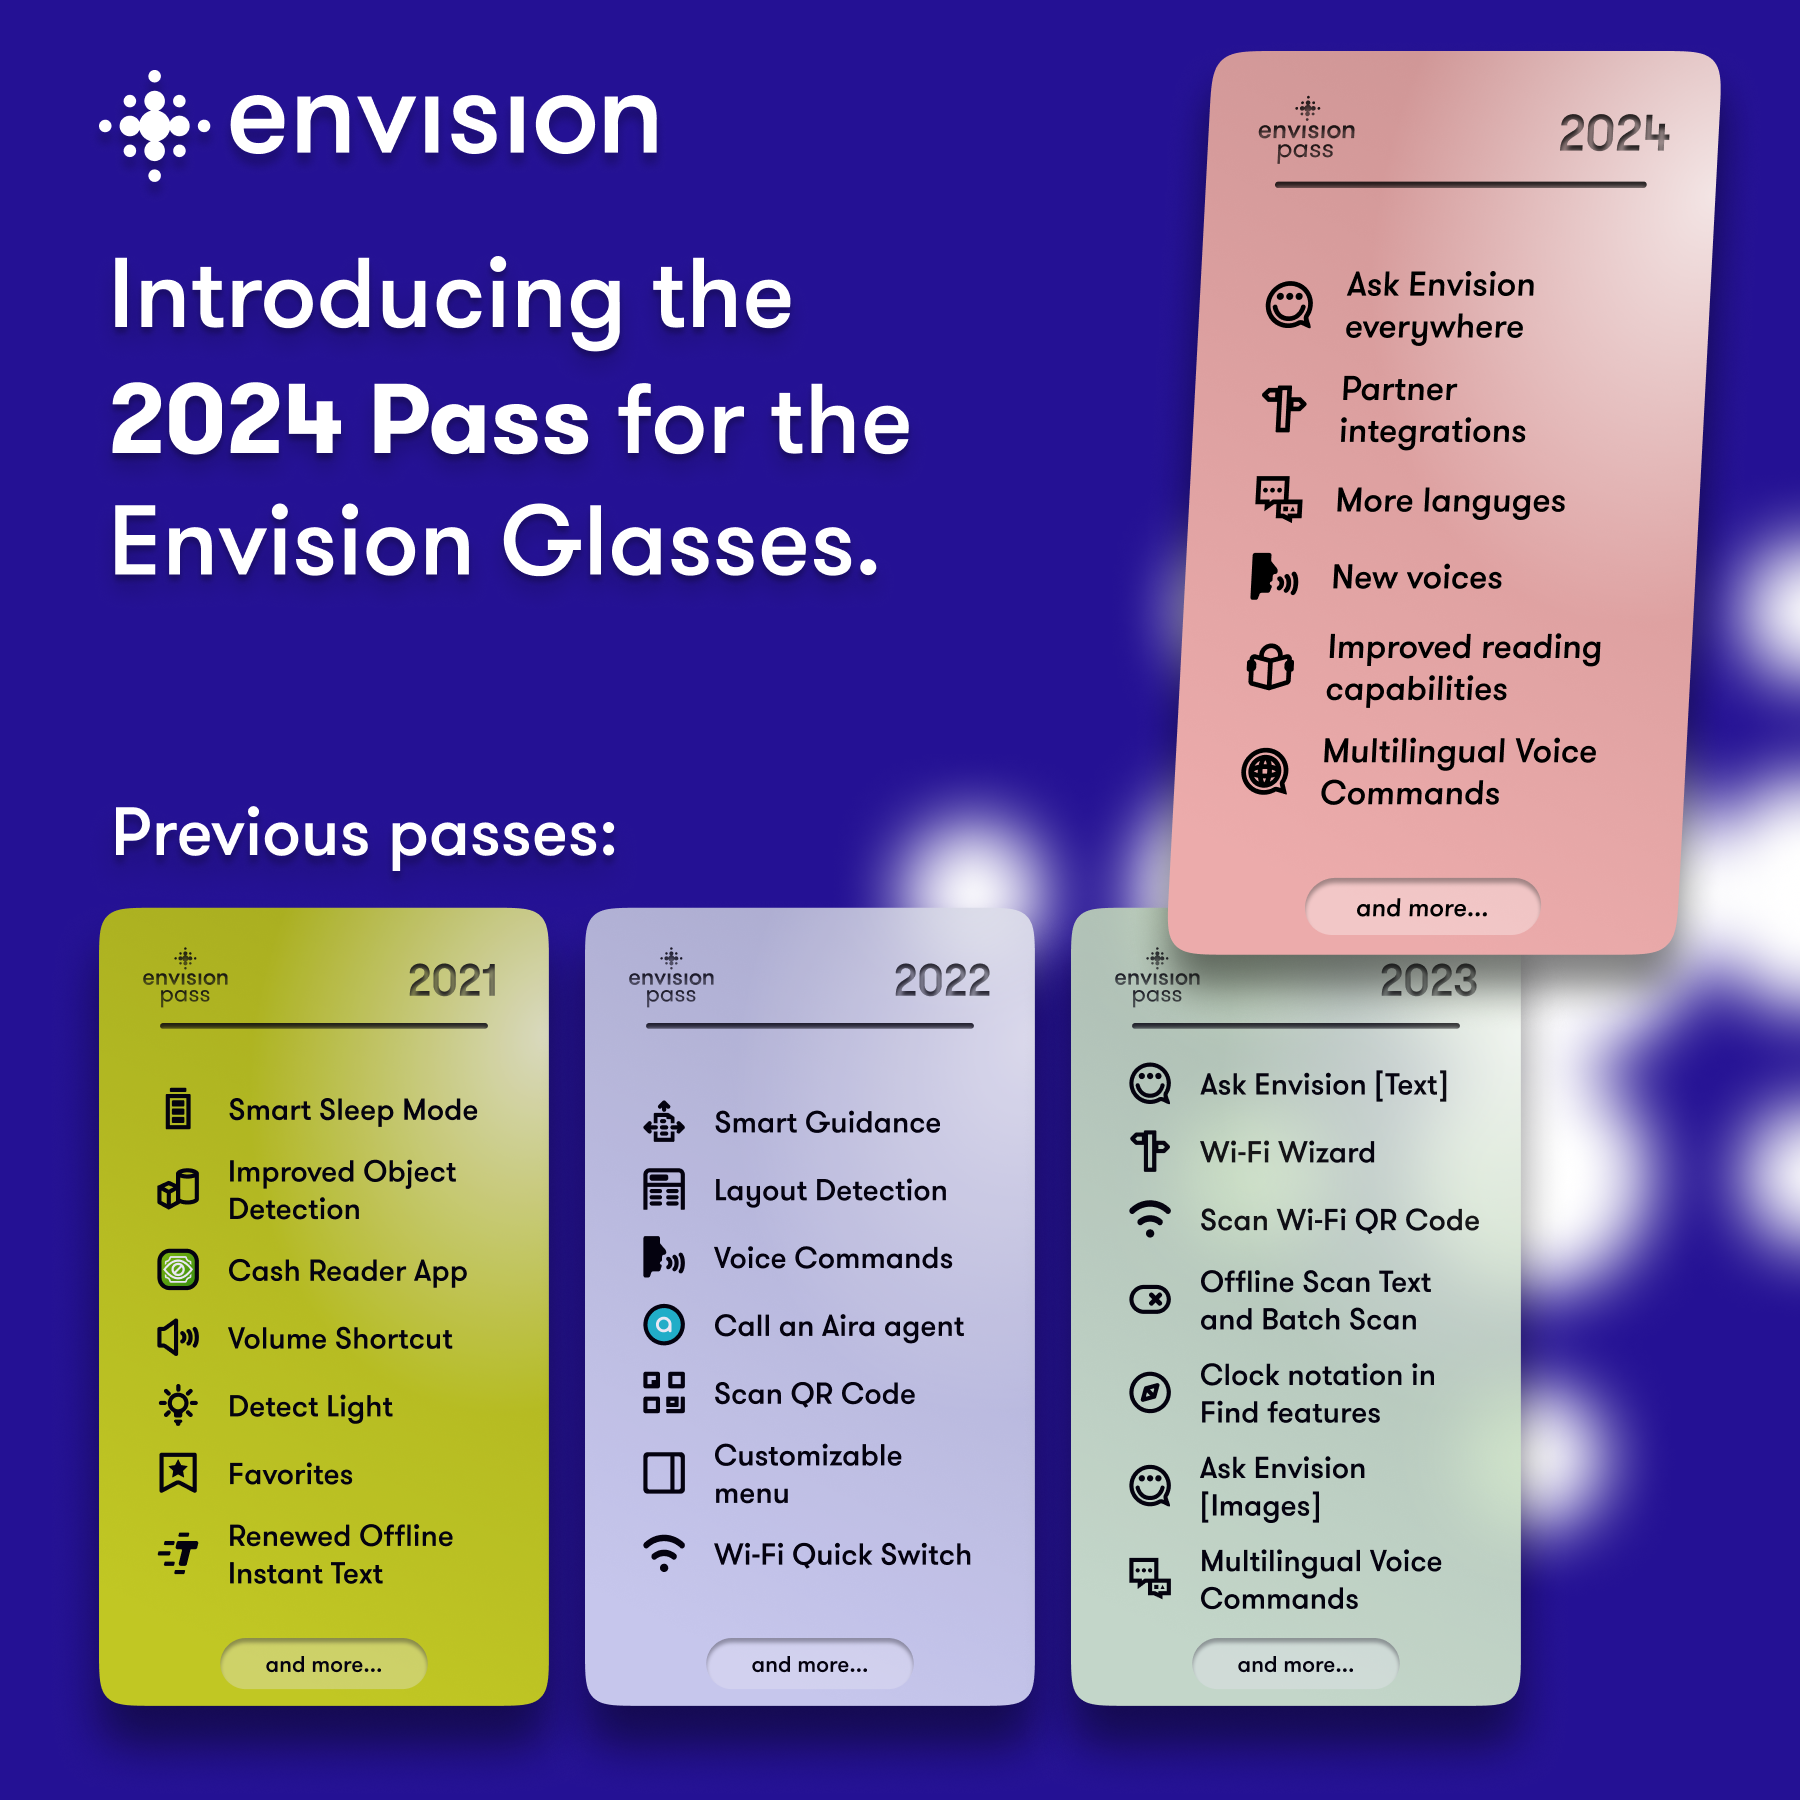 A graphic image of the different passes from 2021 until 2024. The passes from 2021 until 2023 show features that have been released to the Envision Glasses, whereas the 2024 Pass has features that will come in 2024.